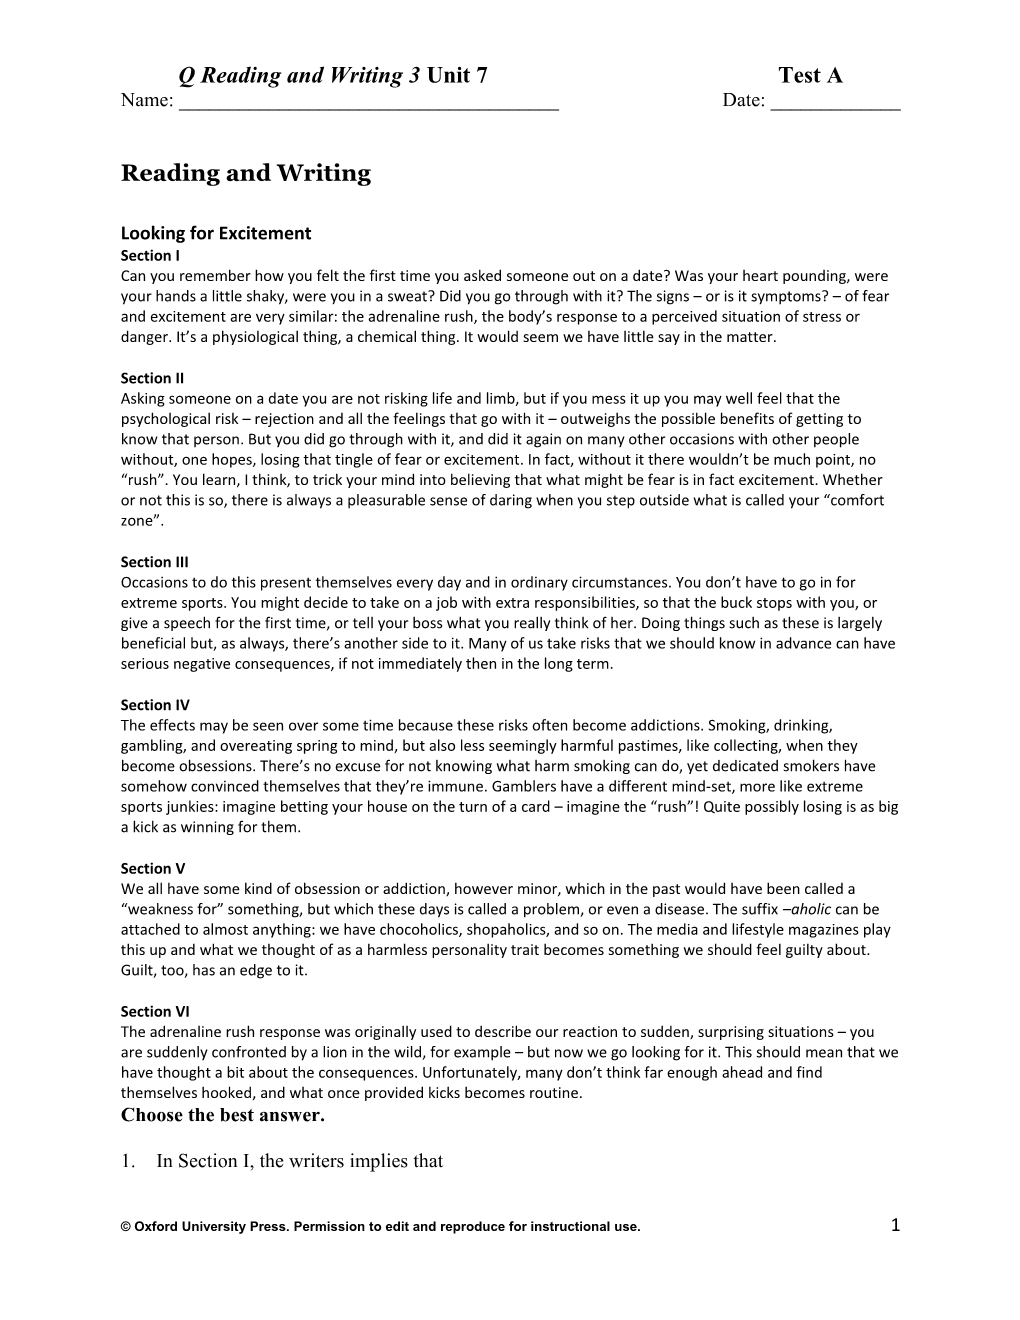 Q Reading and Writing 3 Unit 7 Test A